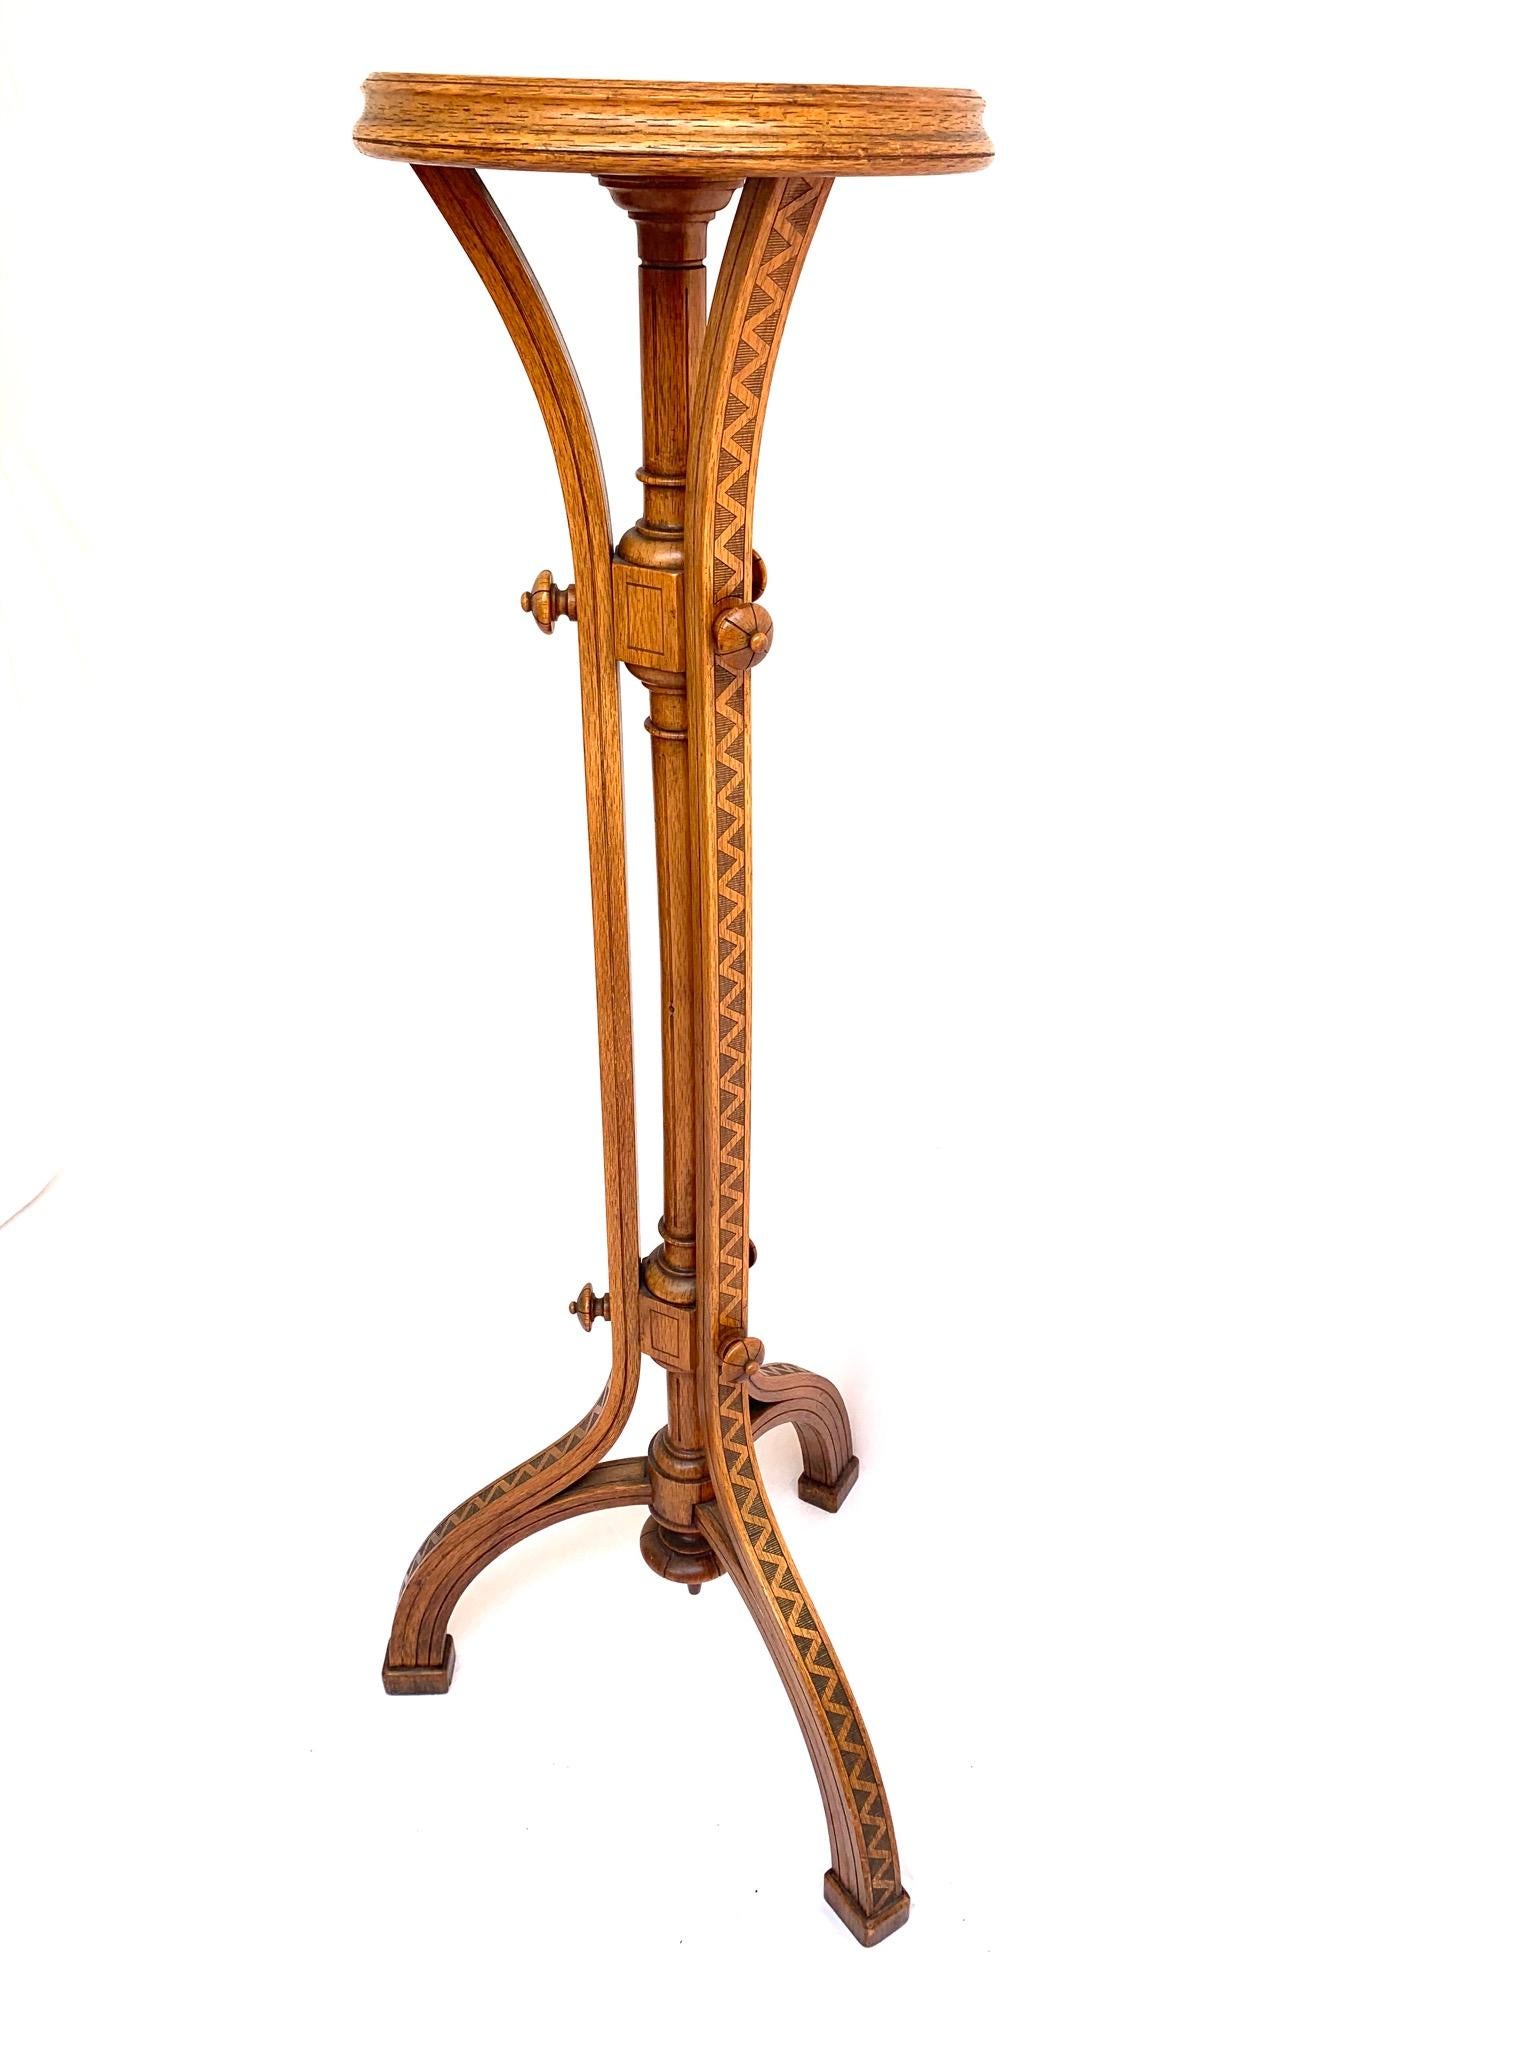 Striking & Top Quality Made Bentwood Vienne Secession Pedestal / Sculpture Stand 5